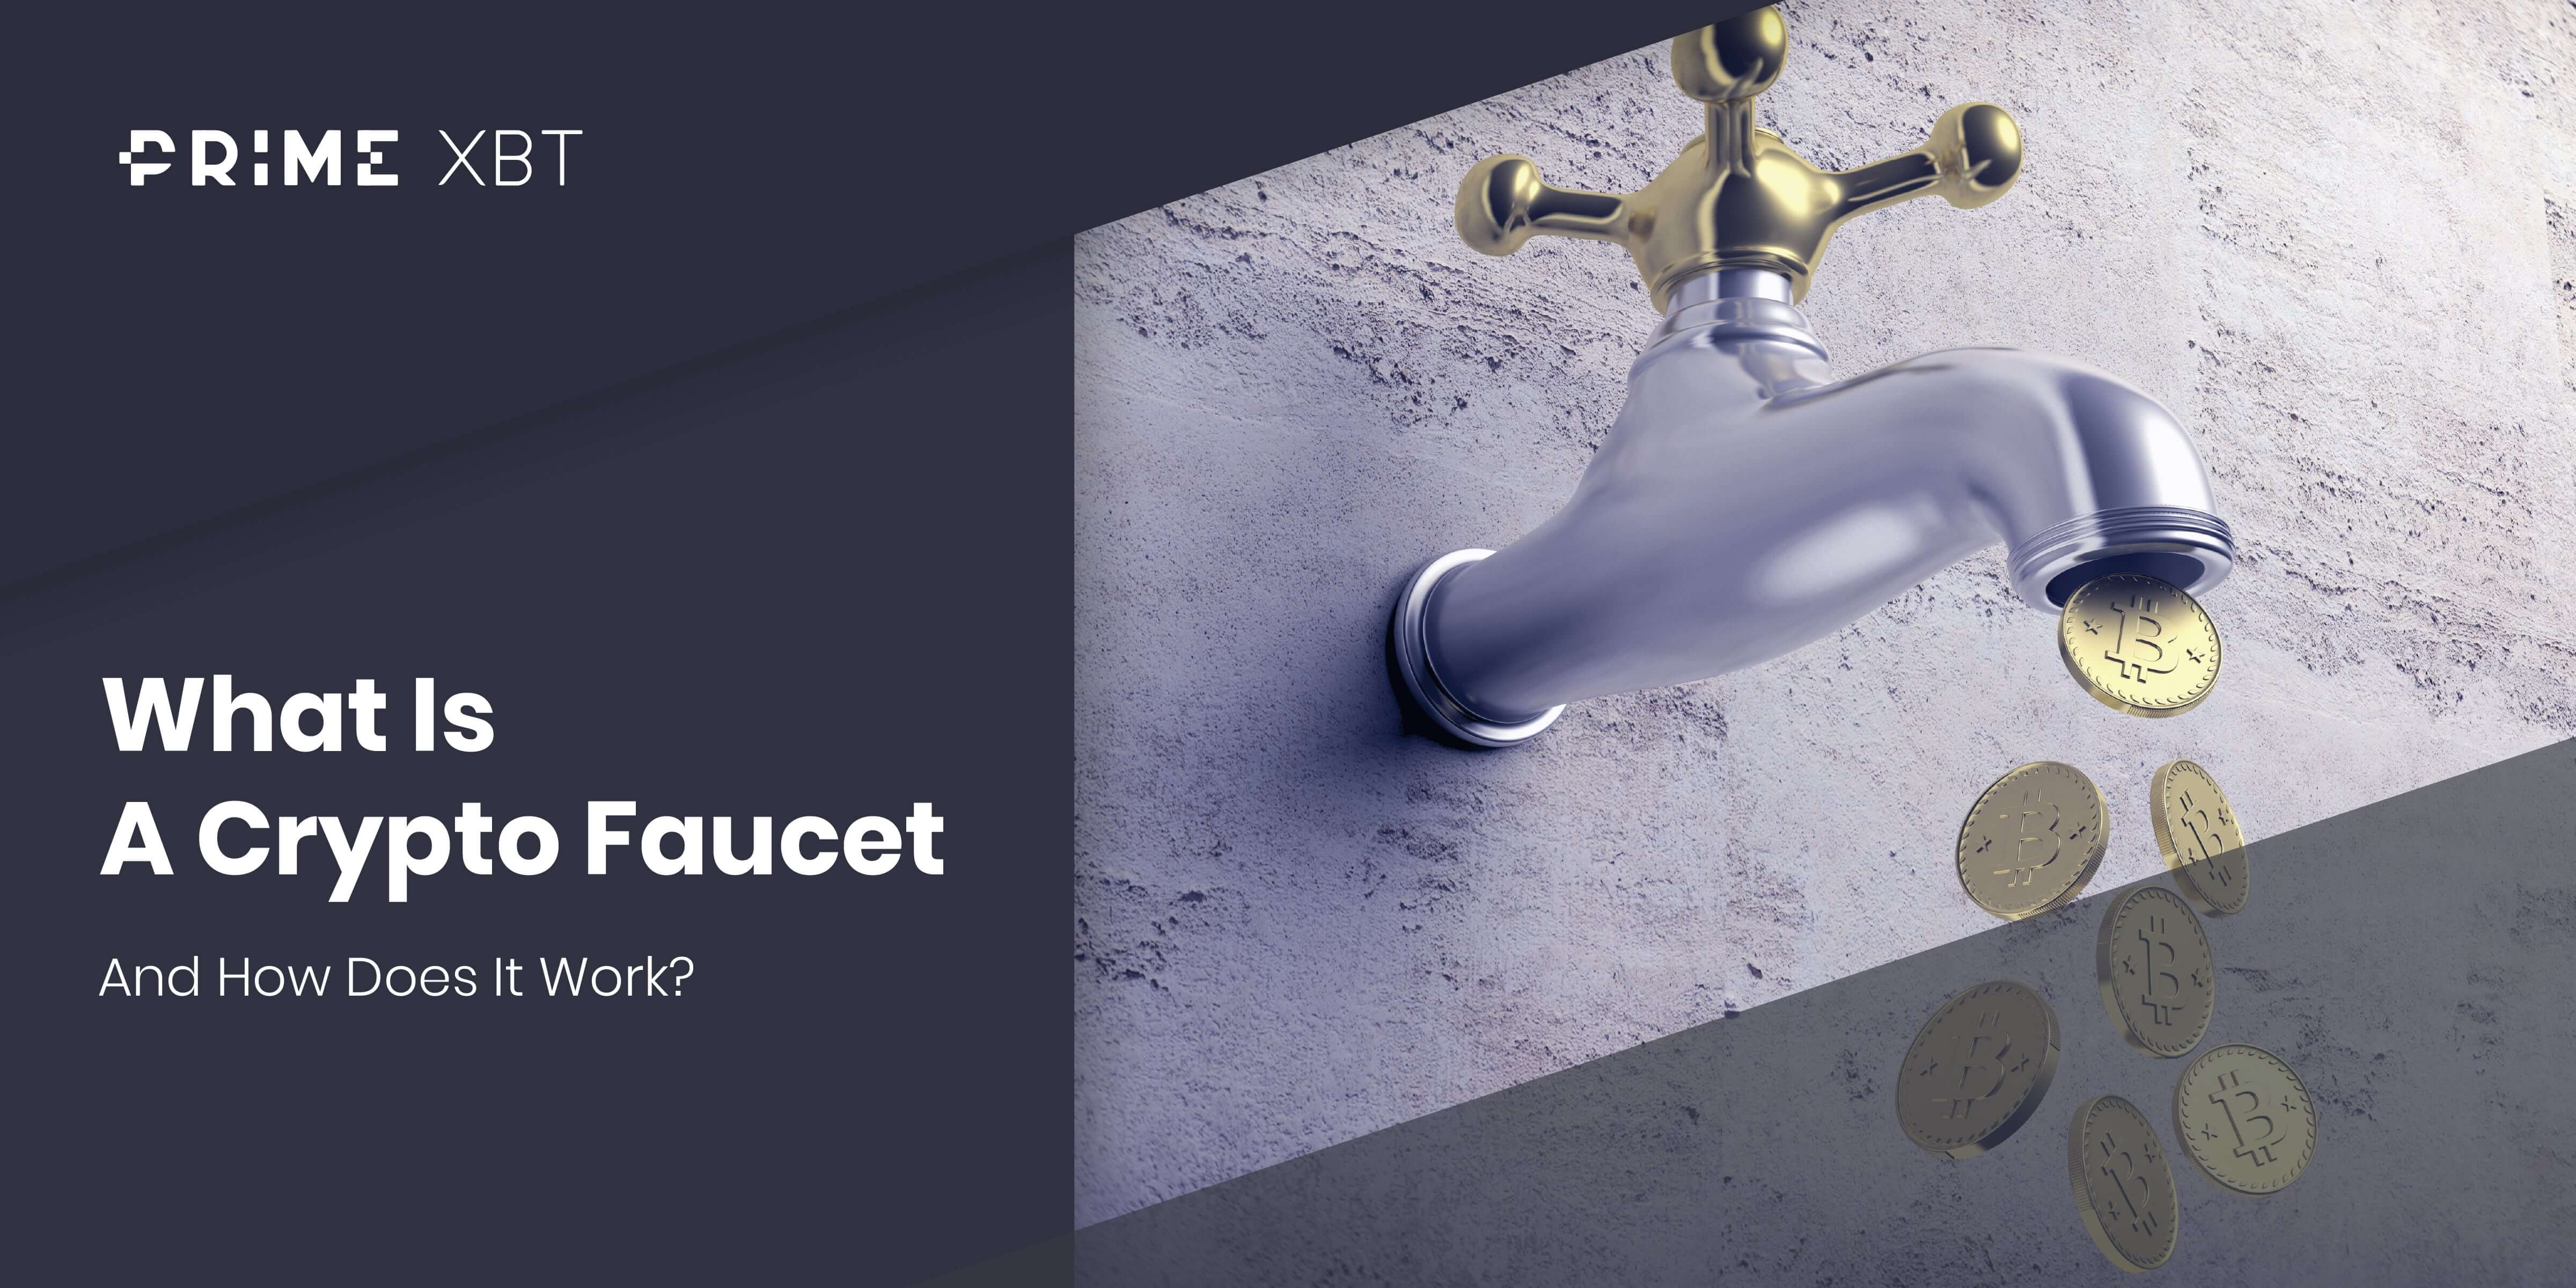 What Is A Crypto Faucet And How Does It Work? - Fauset min 1